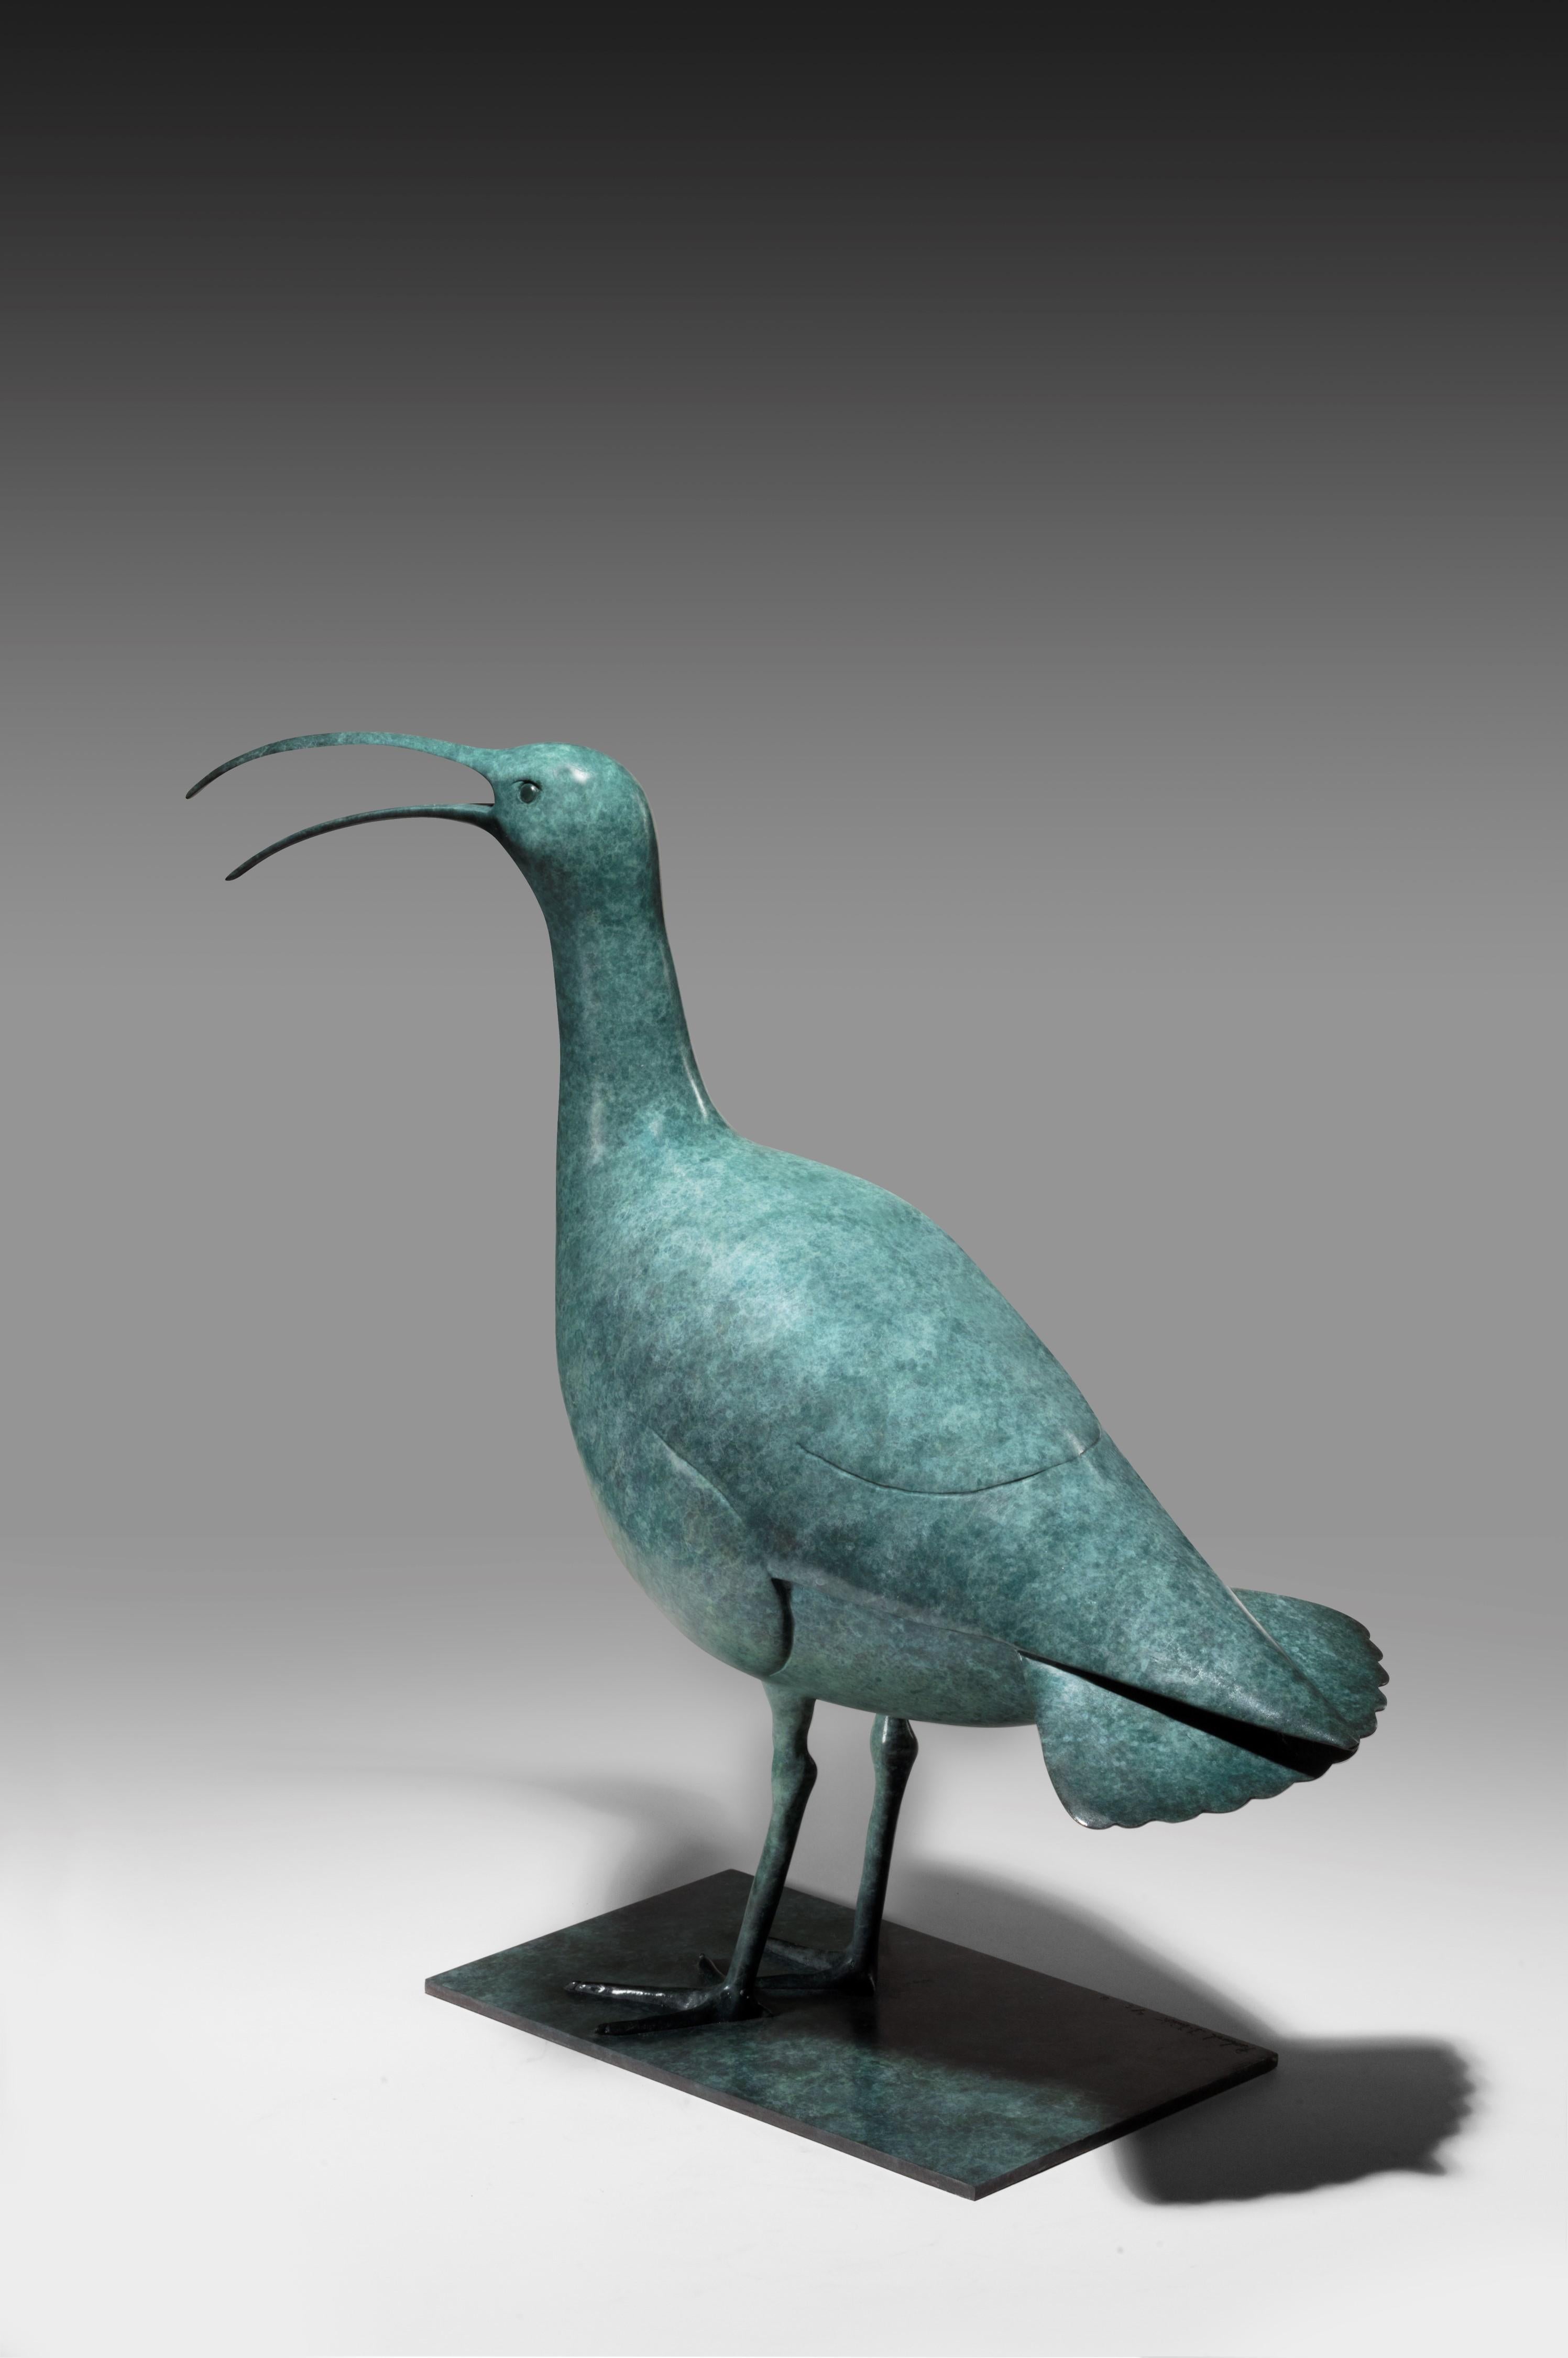 'Calling Curlew' is a Solid Bronze Bird Sculpture by Richard Smith is a stunning piece. The endangered curlew is captured beautifully and sculpted with such love - you can feel the artist's love of the animal.

Richard Smith has gained an